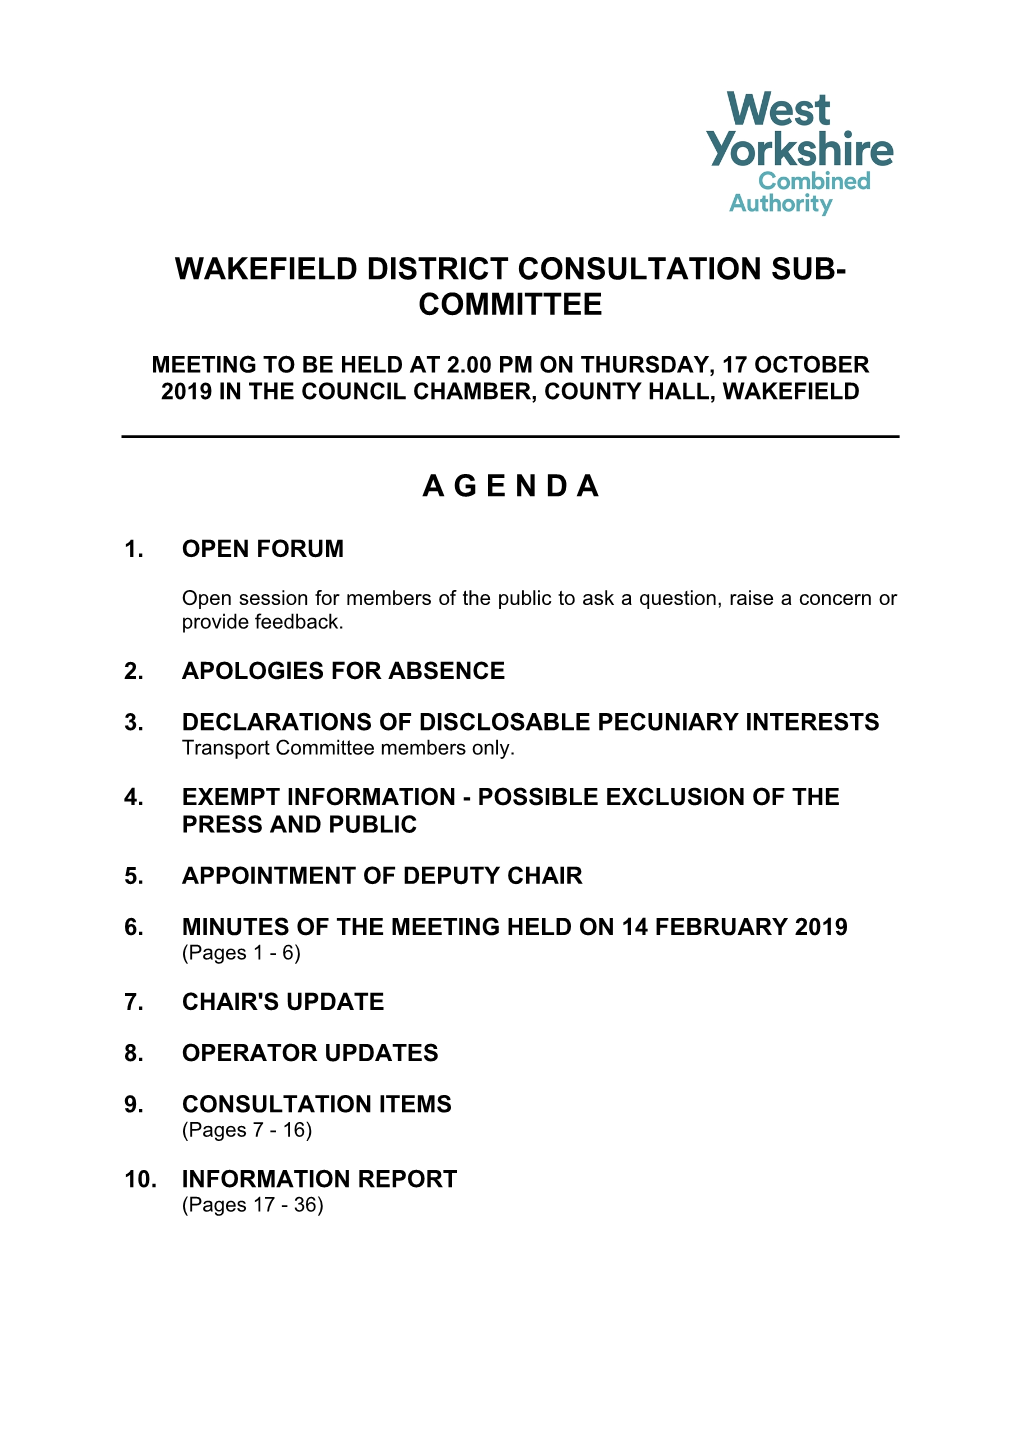 (Public Pack)Agenda Document for Wakefield District Consultation Sub-Committee, 17/10/2019 14:00